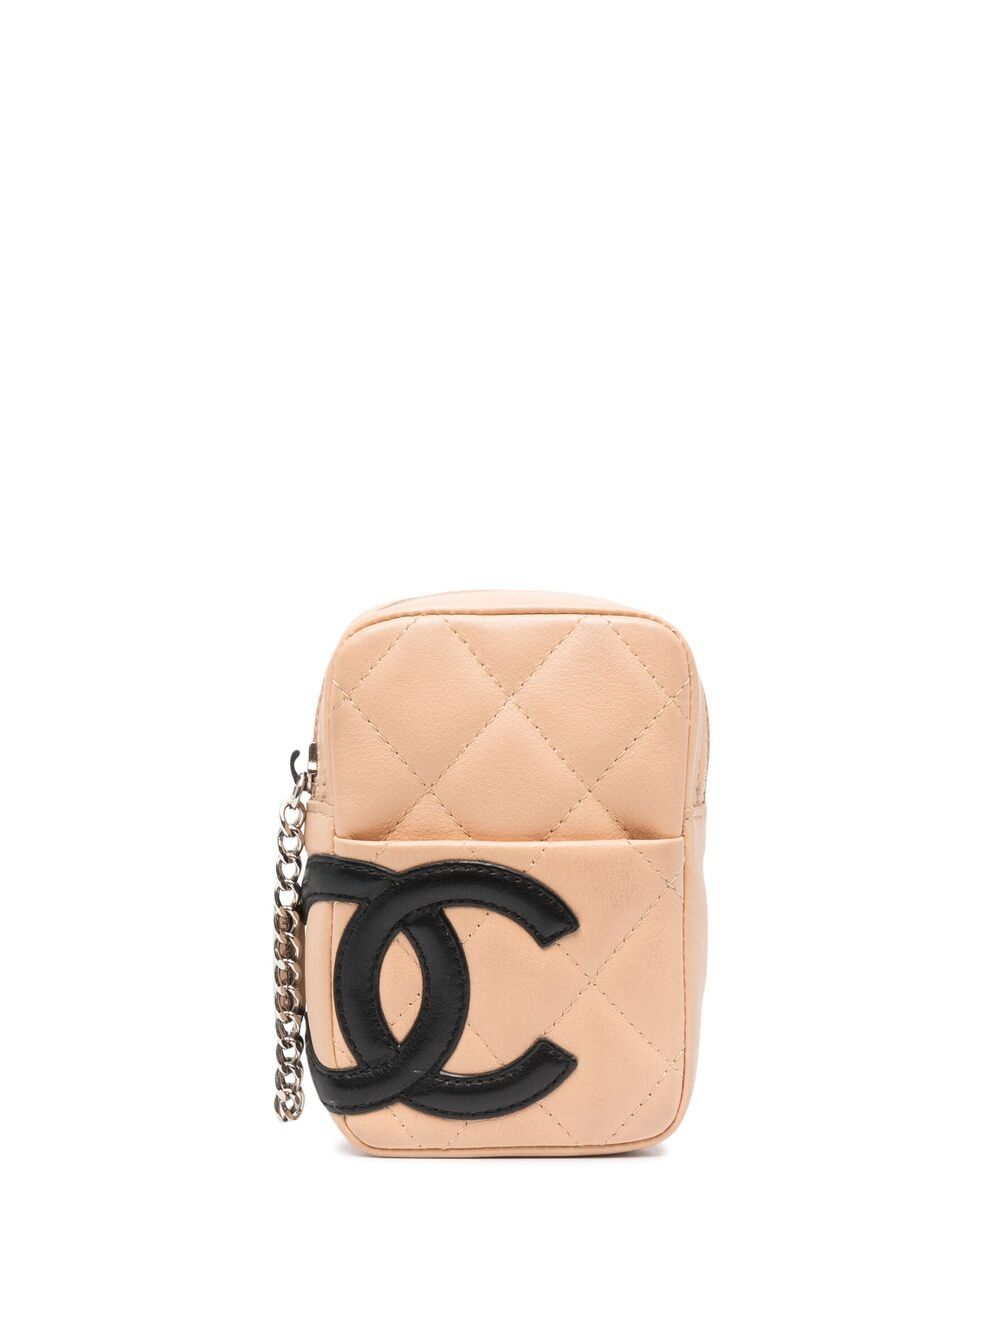 Pre-owned Chanel 2010 Cc Cambon Line Pouch In Neutrals